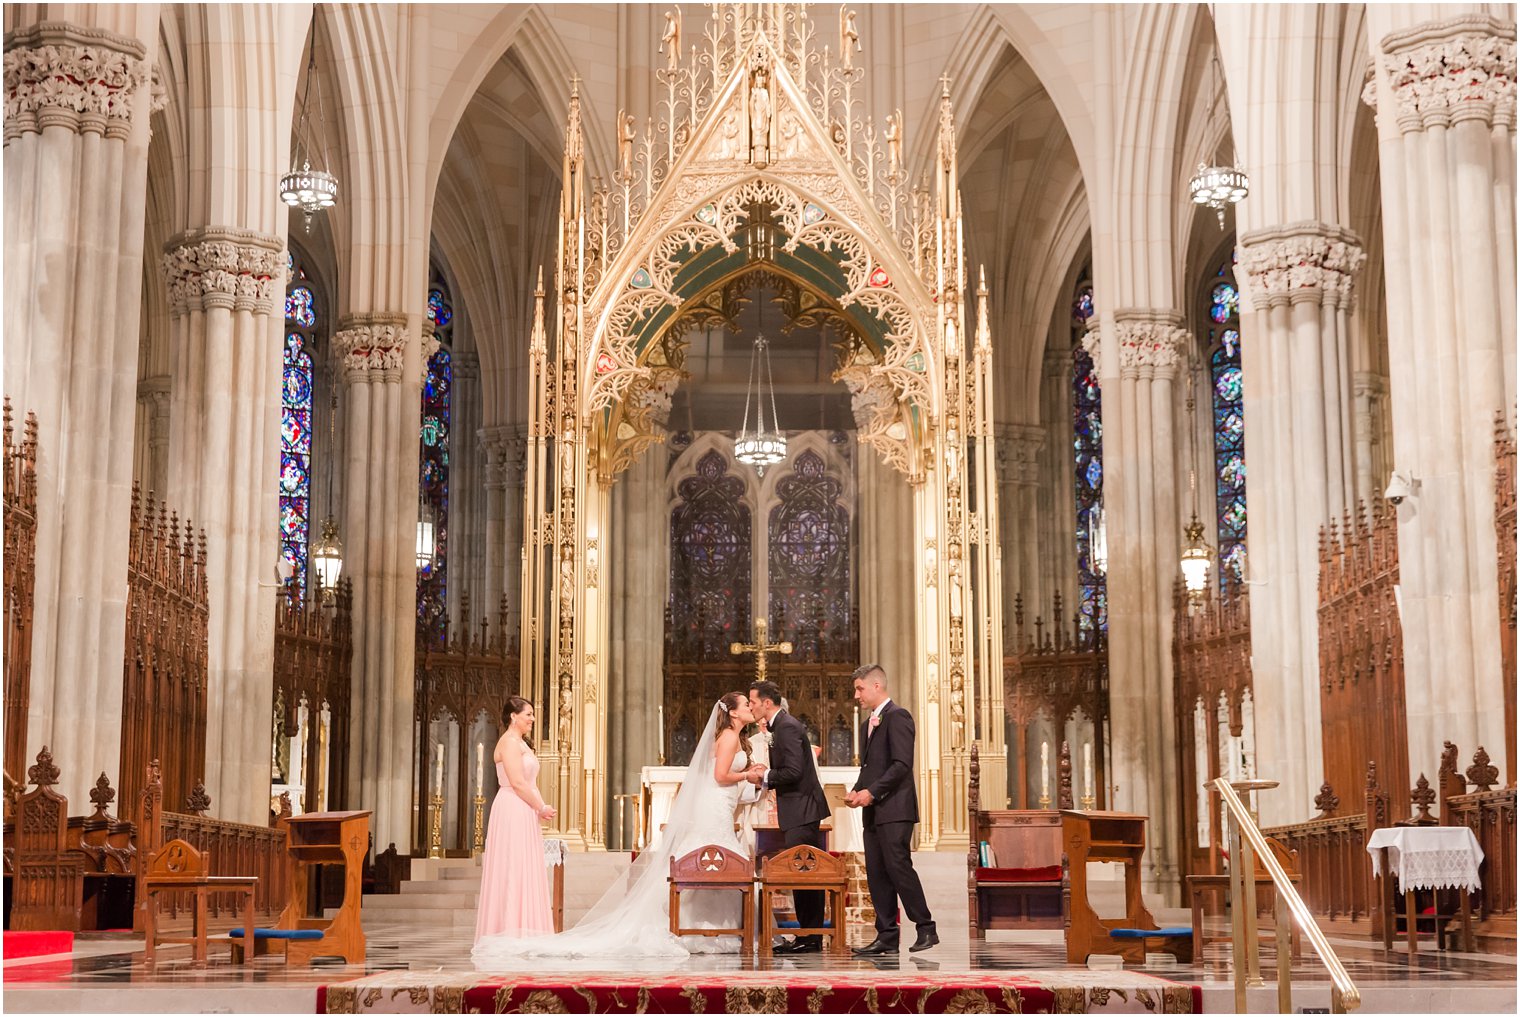 First kiss photo at St. Patrick's Cathedral | Photo by Idalia Photography